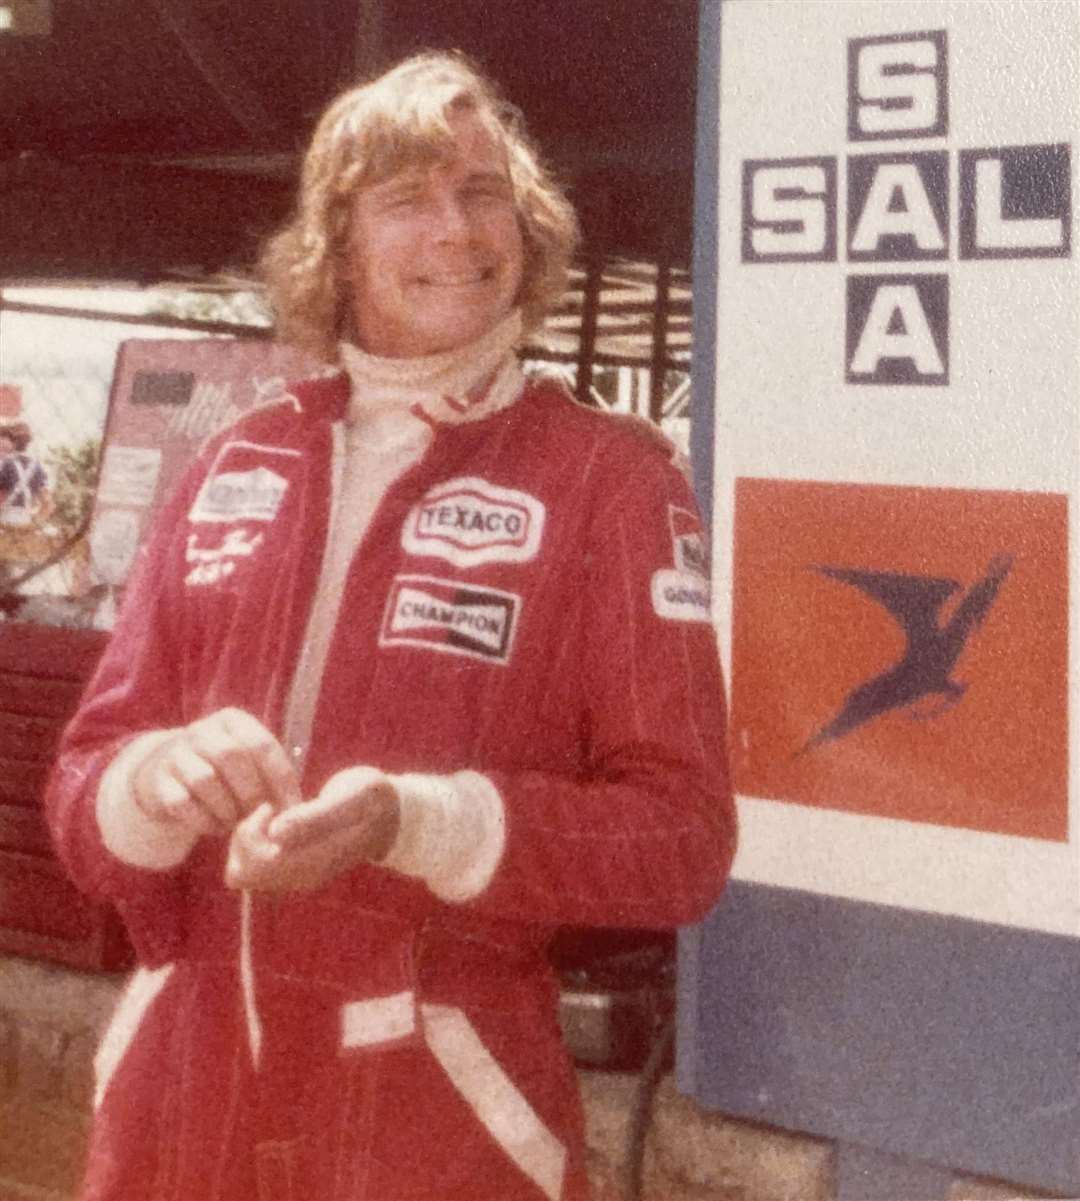 James Hunt smiles for the camera